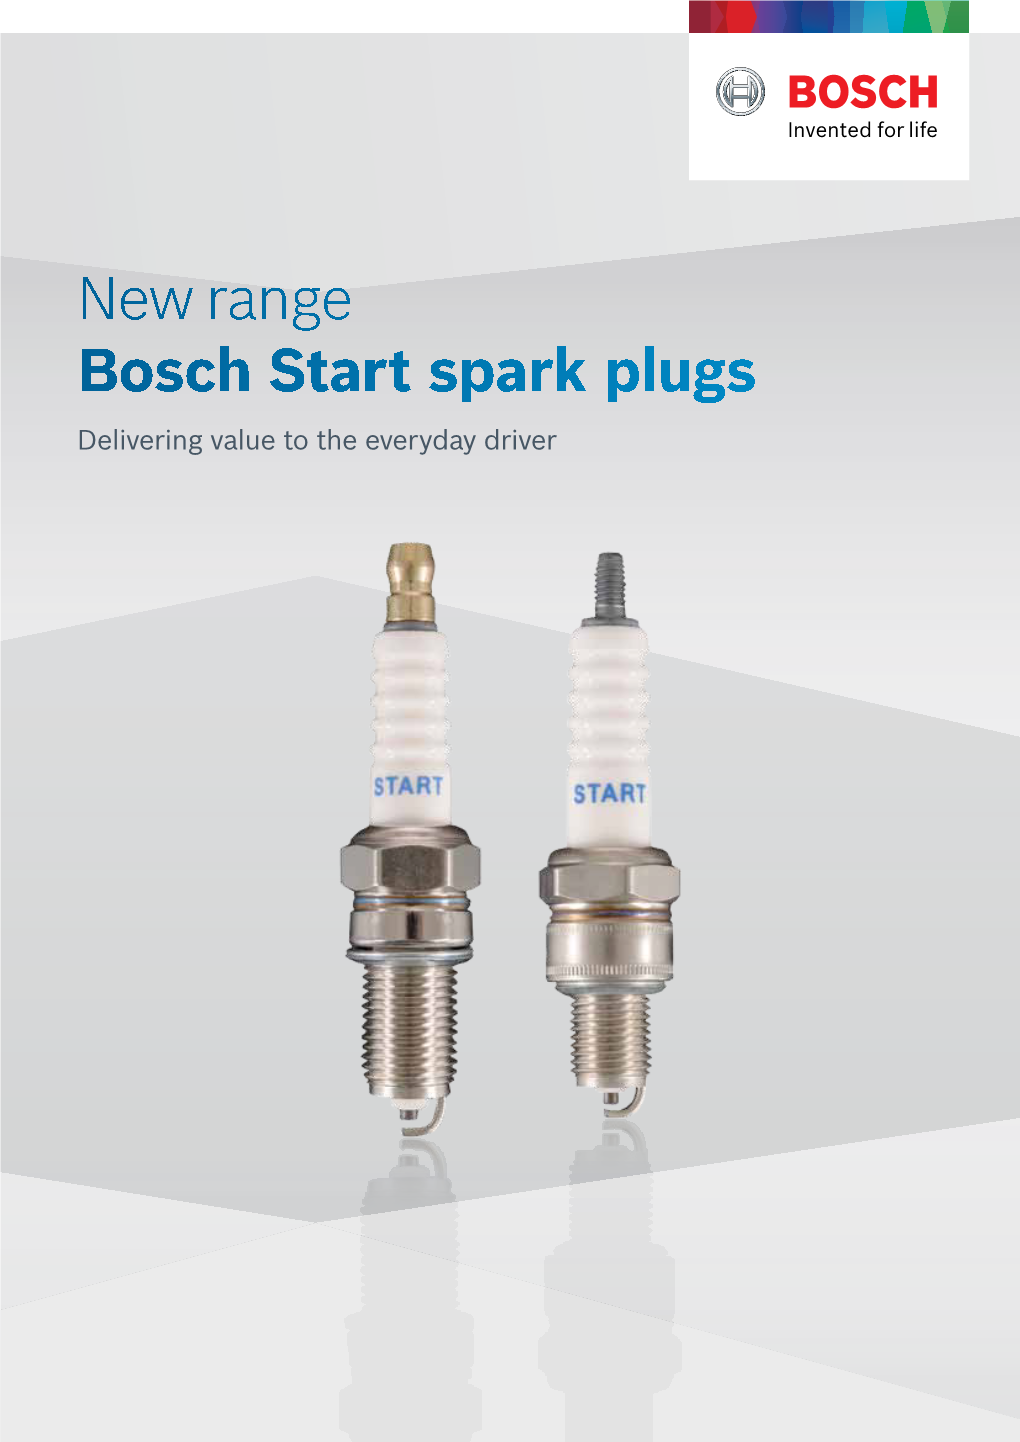 New Range Bosch Start Spark Plugs Delivering Value to the Everyday Driver Application